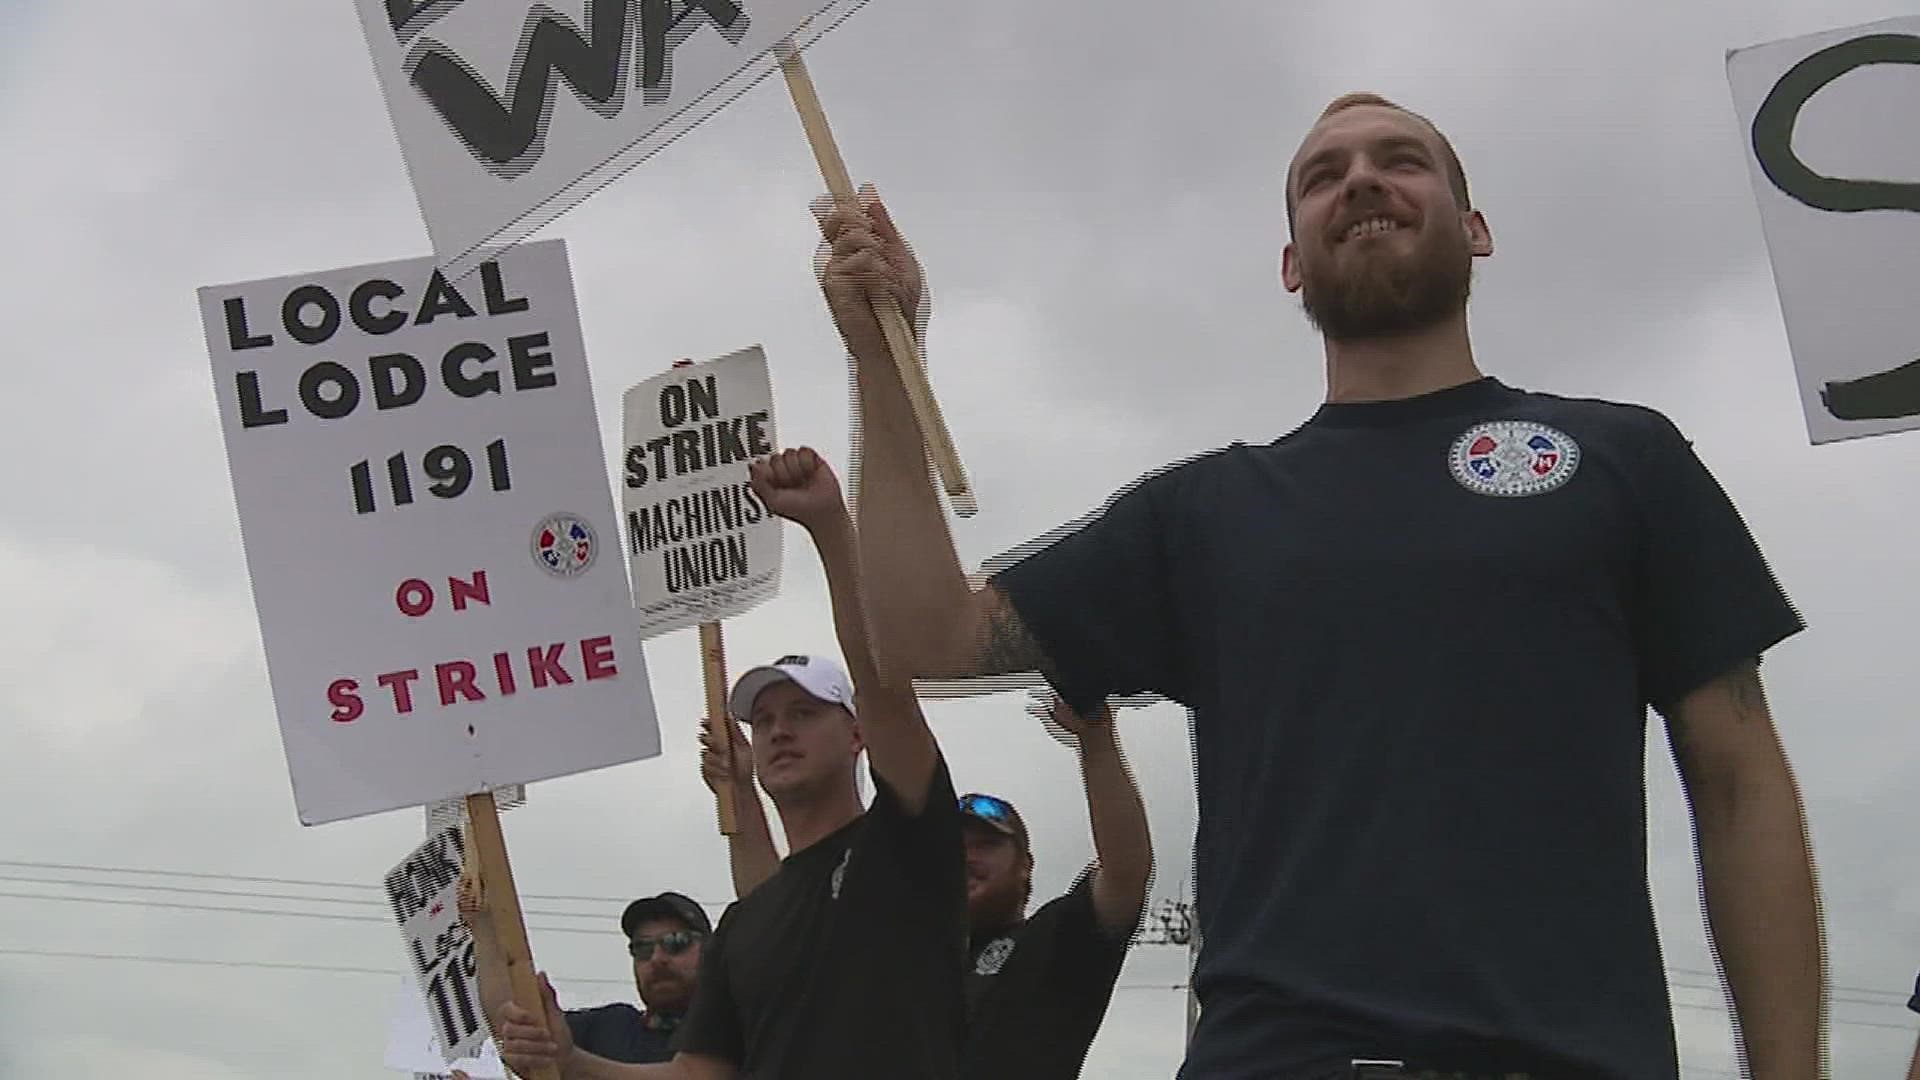 Members of the "Local 1191" union held a strike outside of Kone's Coal Valley location, asking for retirement benefits, and an end to Kone's 2-tiered pay scale.